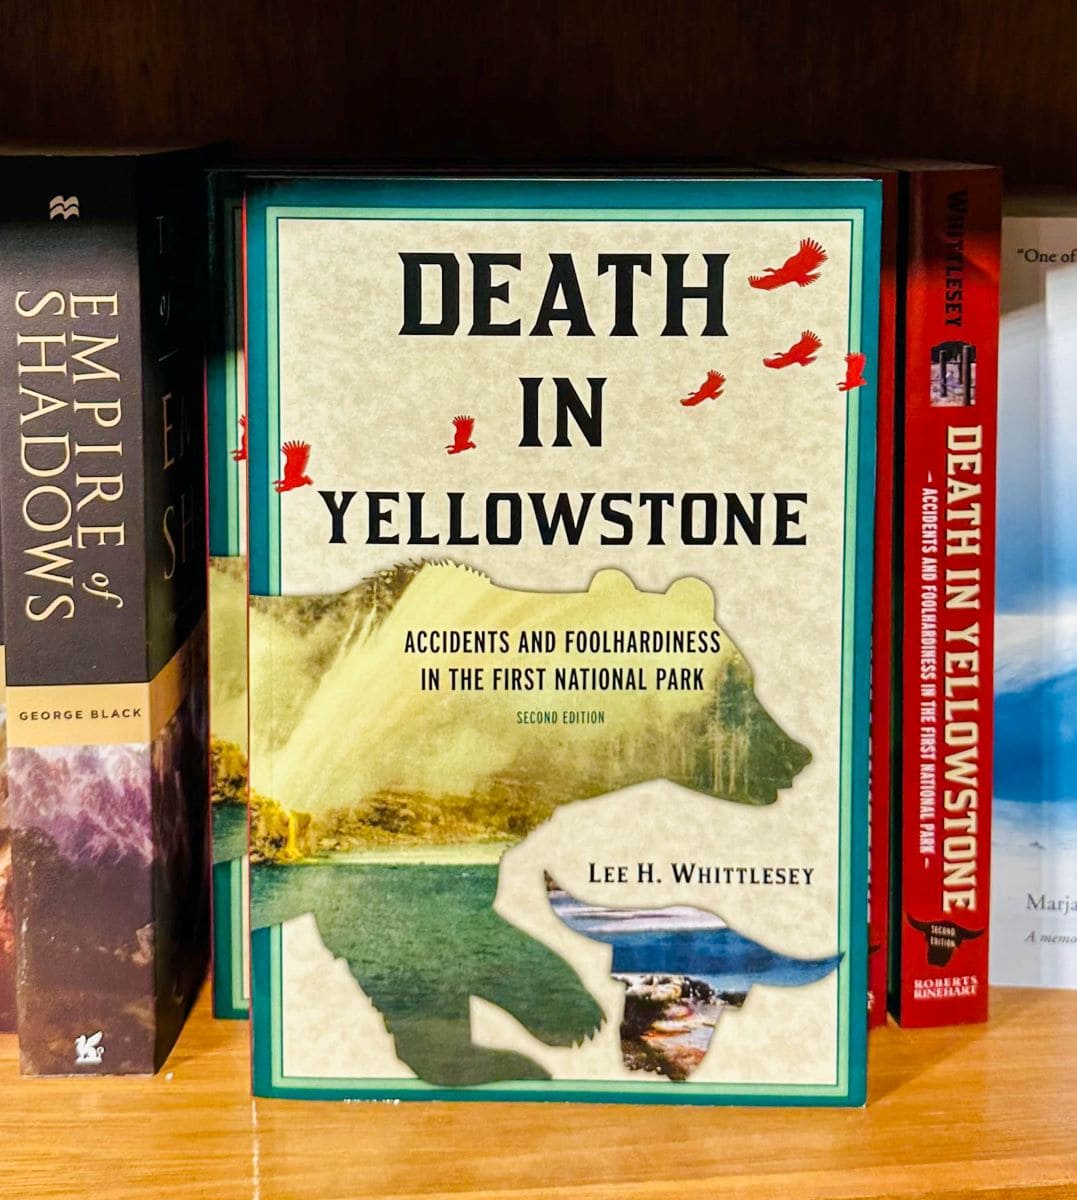 Photo of book titled, Death in Yellowstone